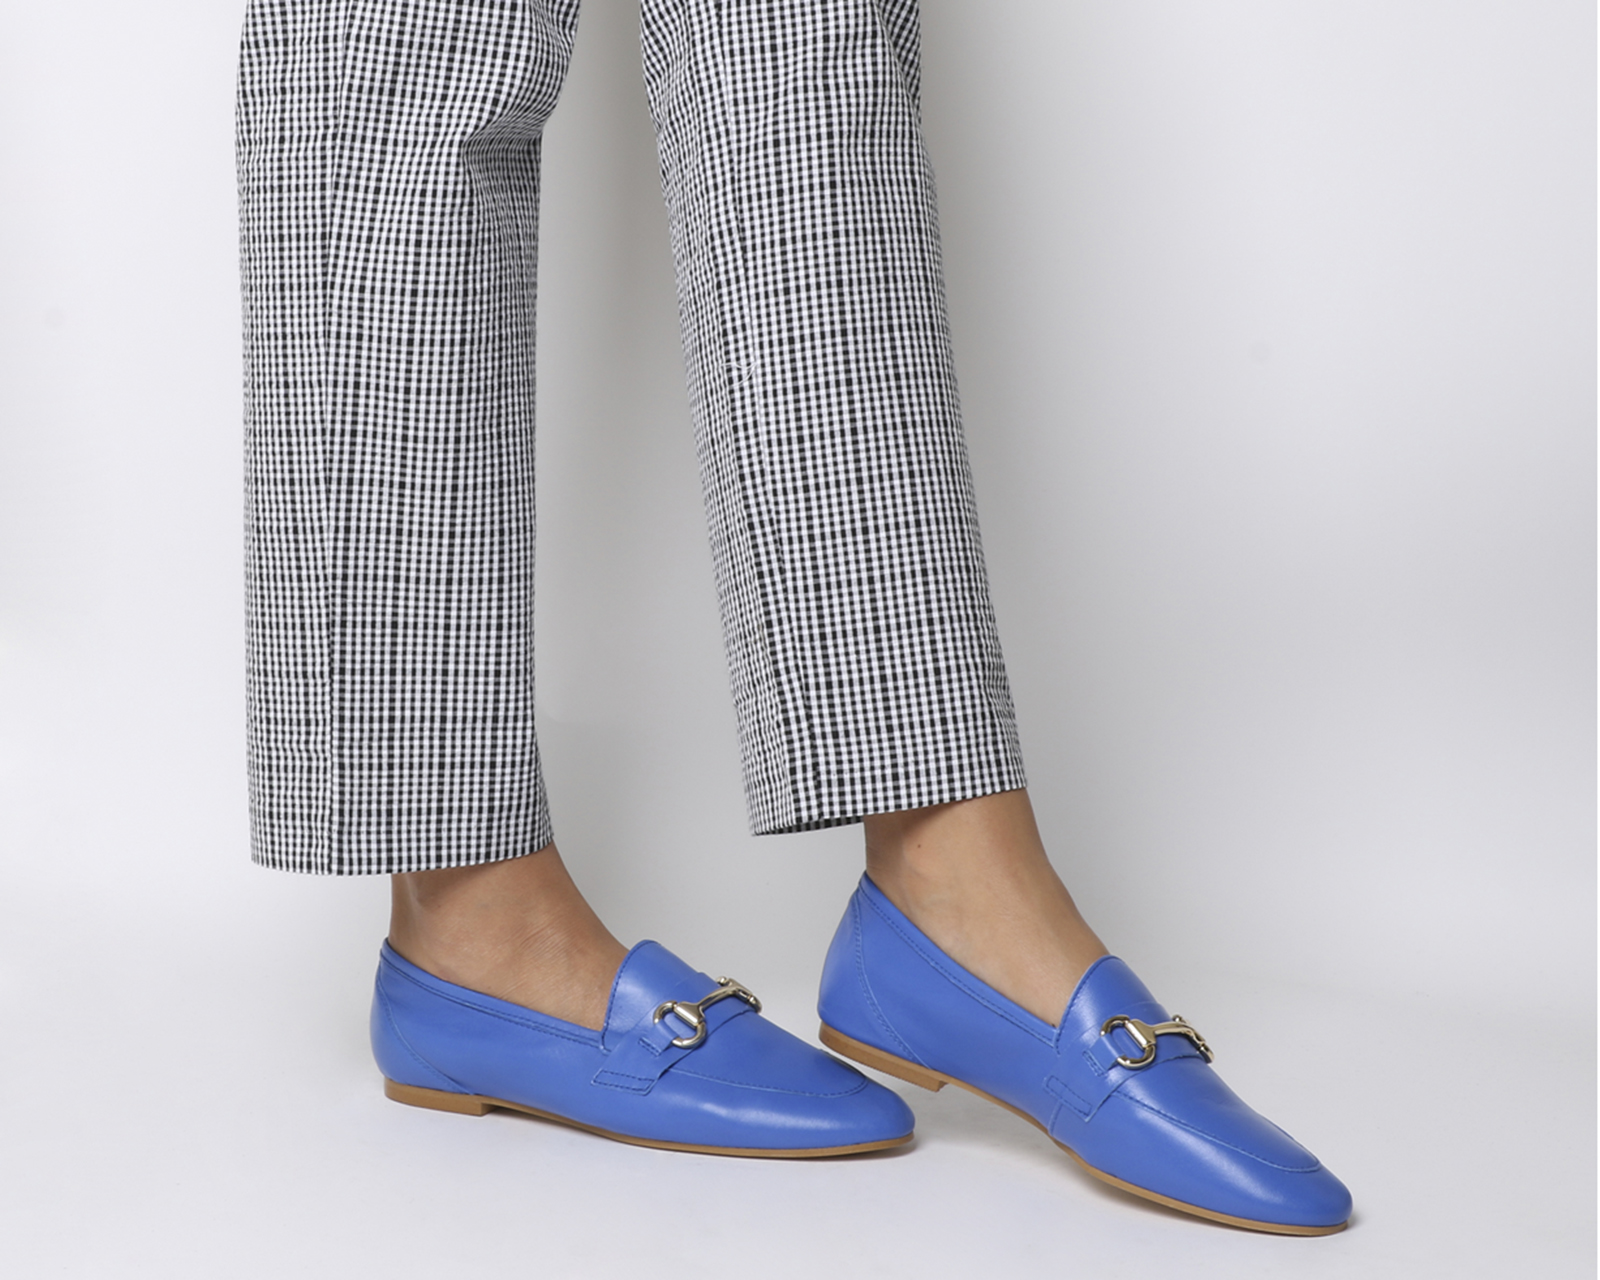 OFFICEDestiny Trim LoafersBlue Leather